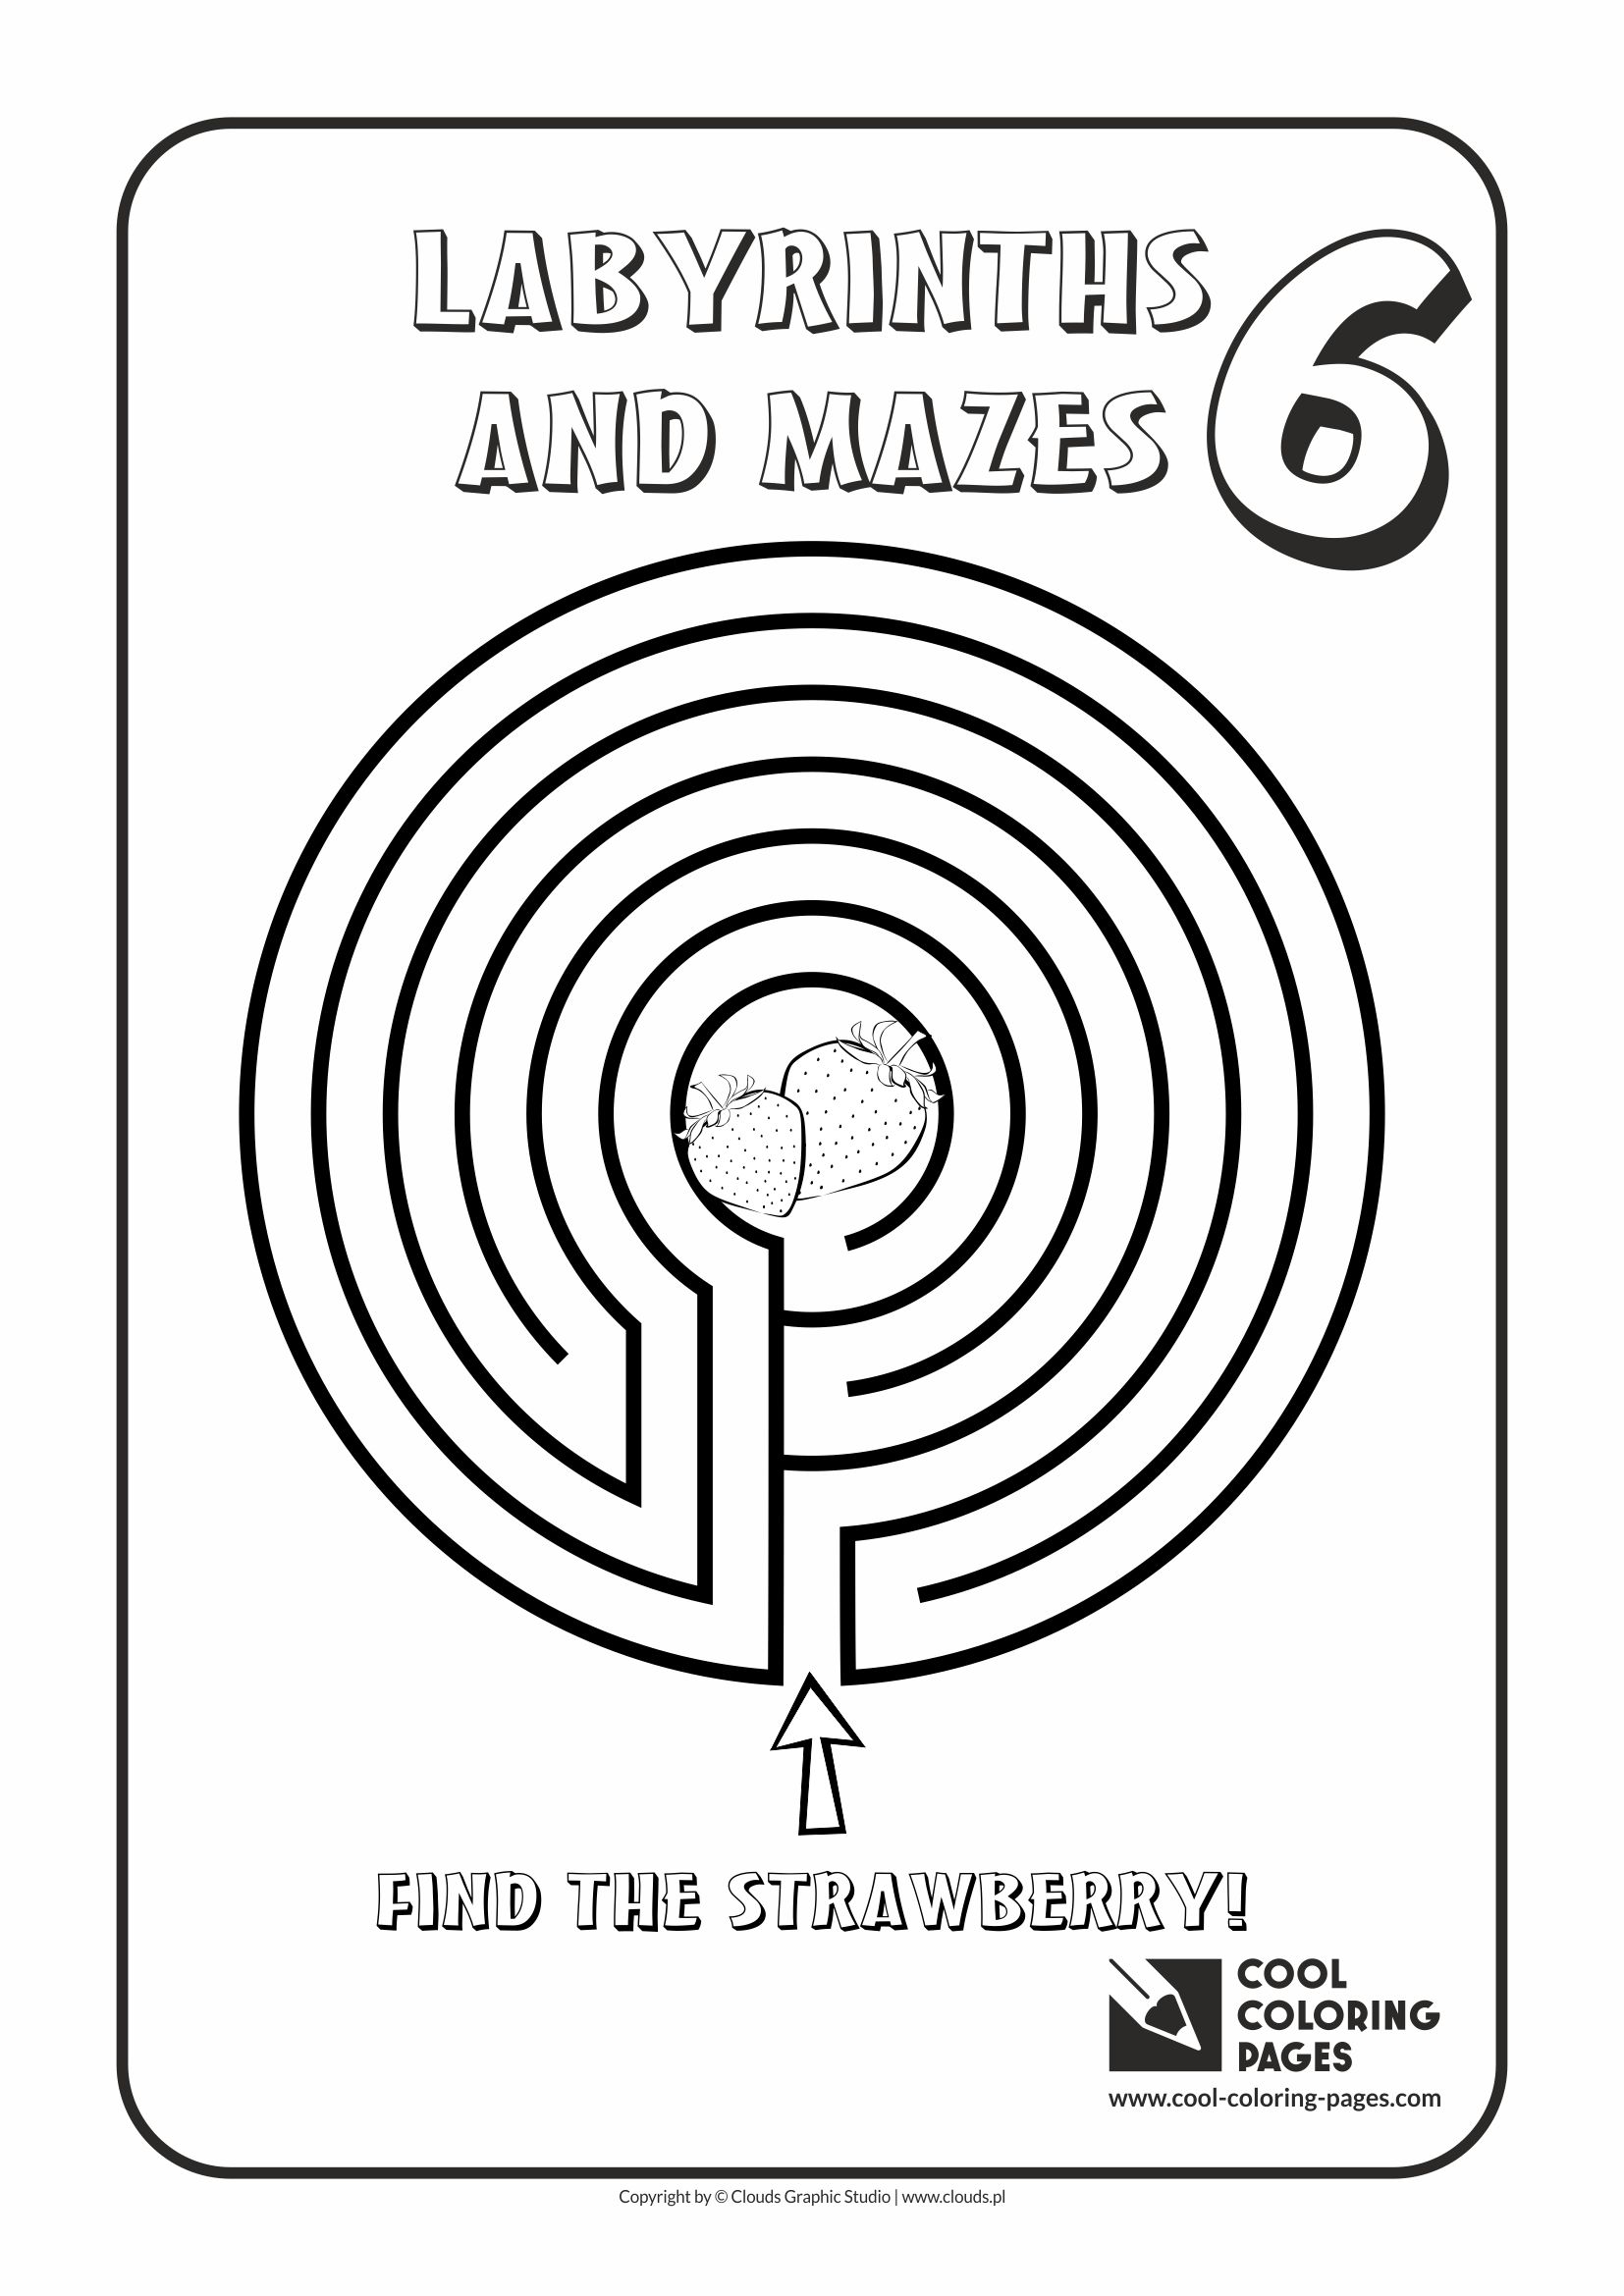 Cool Coloring Pages - Labyrinths and mazes / Maze no 6